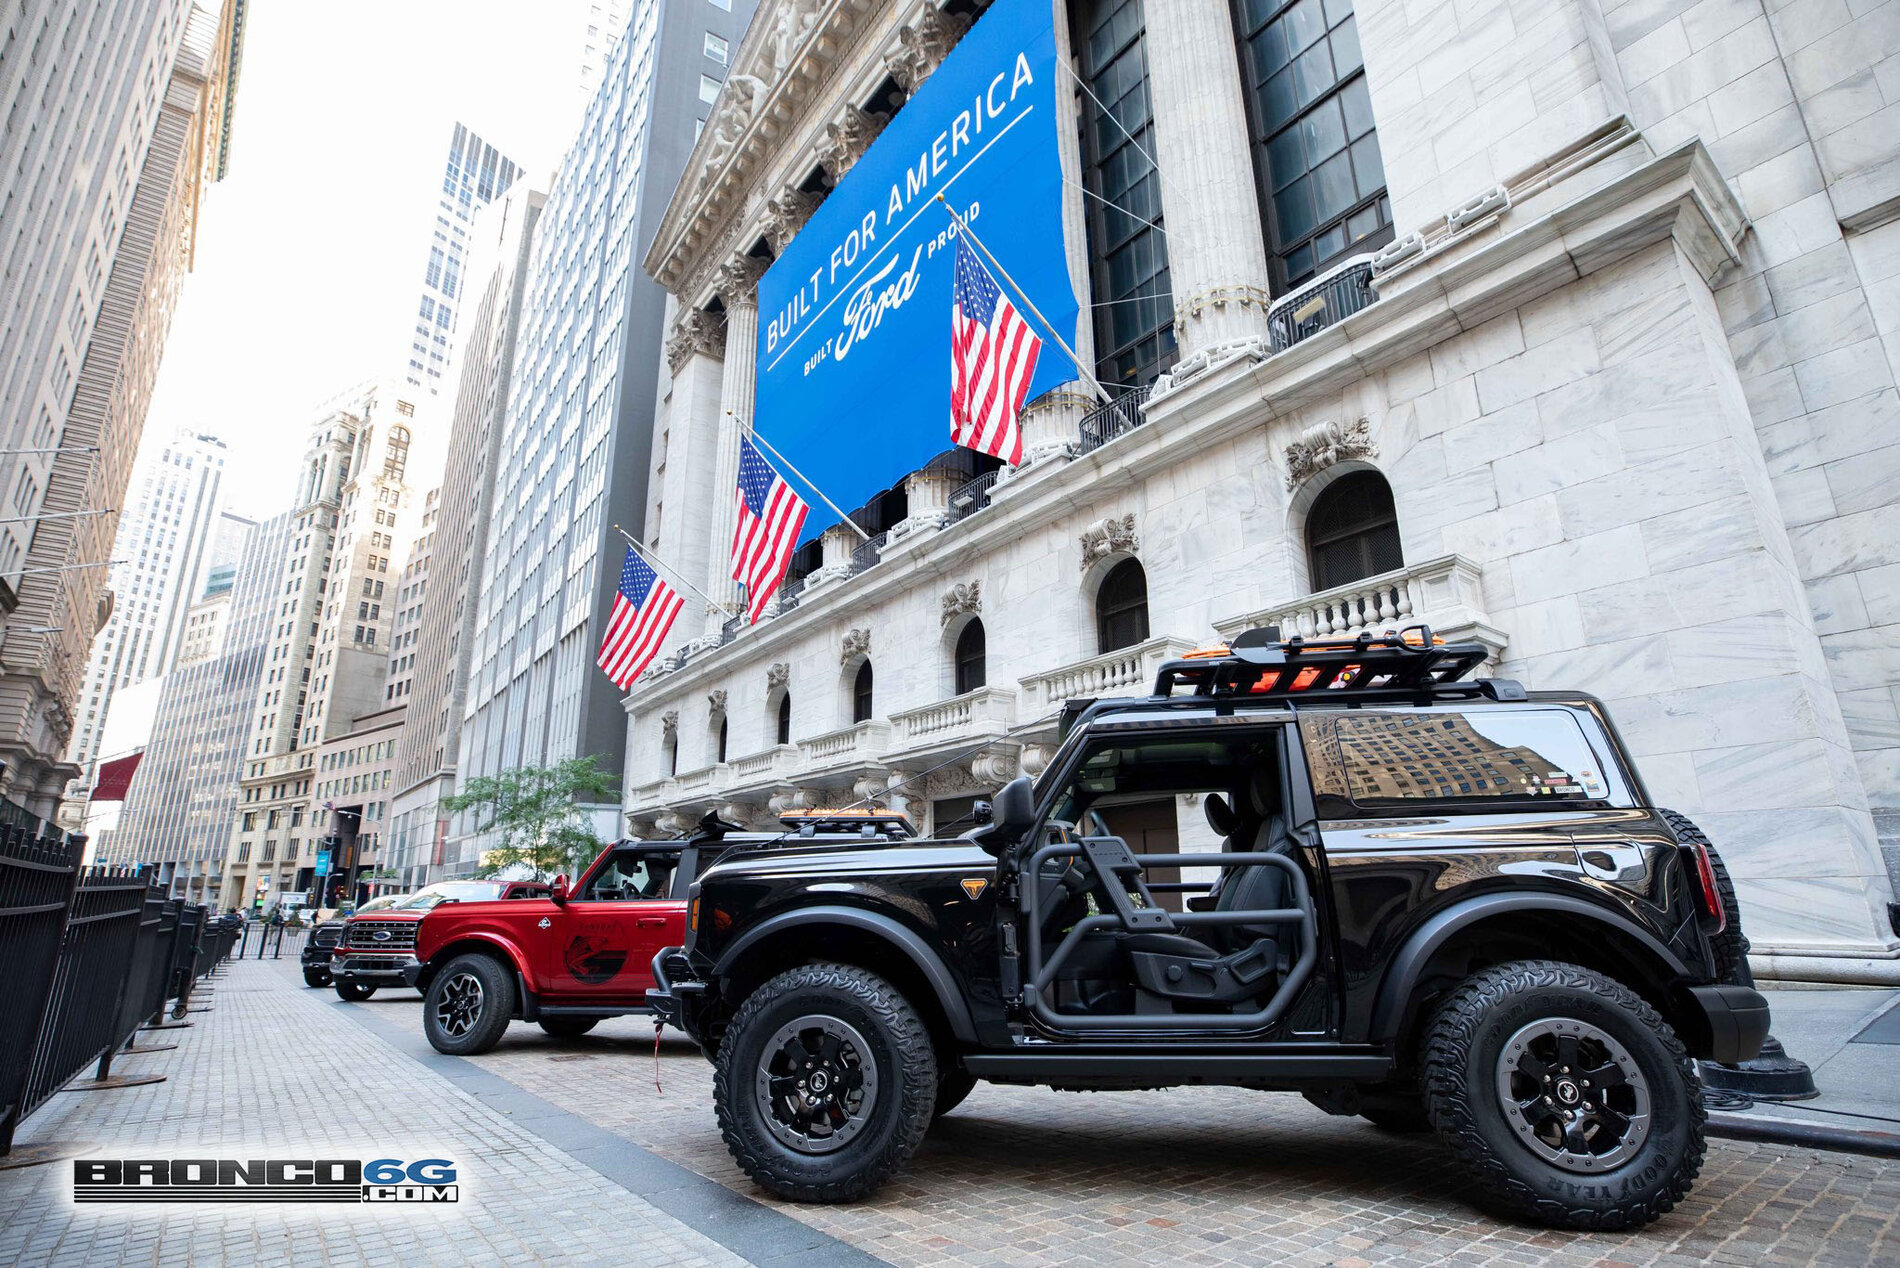 Ford Bronco 2021 Ford Bronco Makes NYC Debut at NYSE (Aug 17) - Pics, Video, Q&A 2021 Ford Bronco NYC NYSE